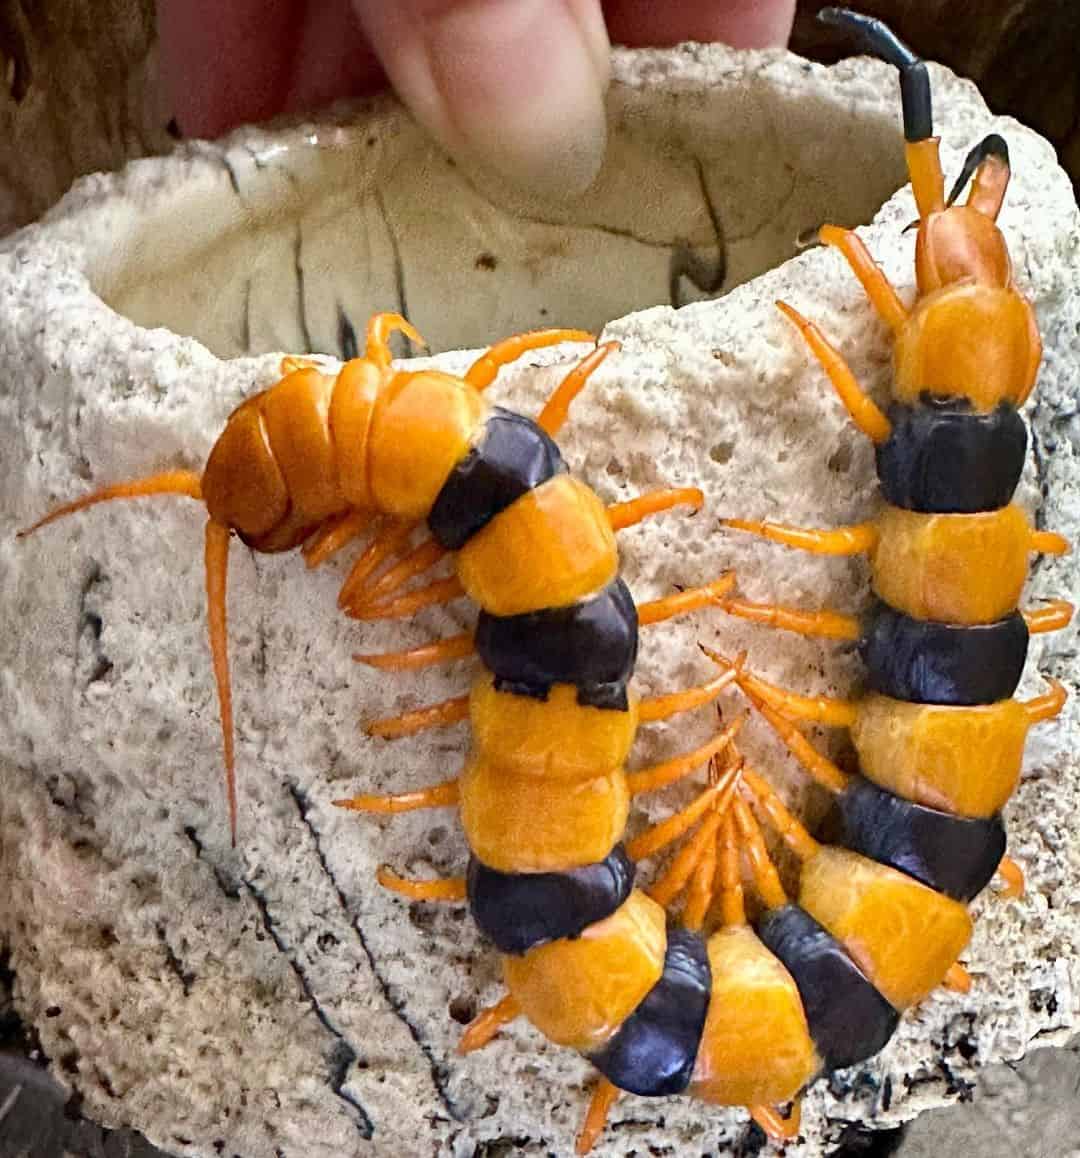 Additional Ways to Deter Centipedes from Your Homestead